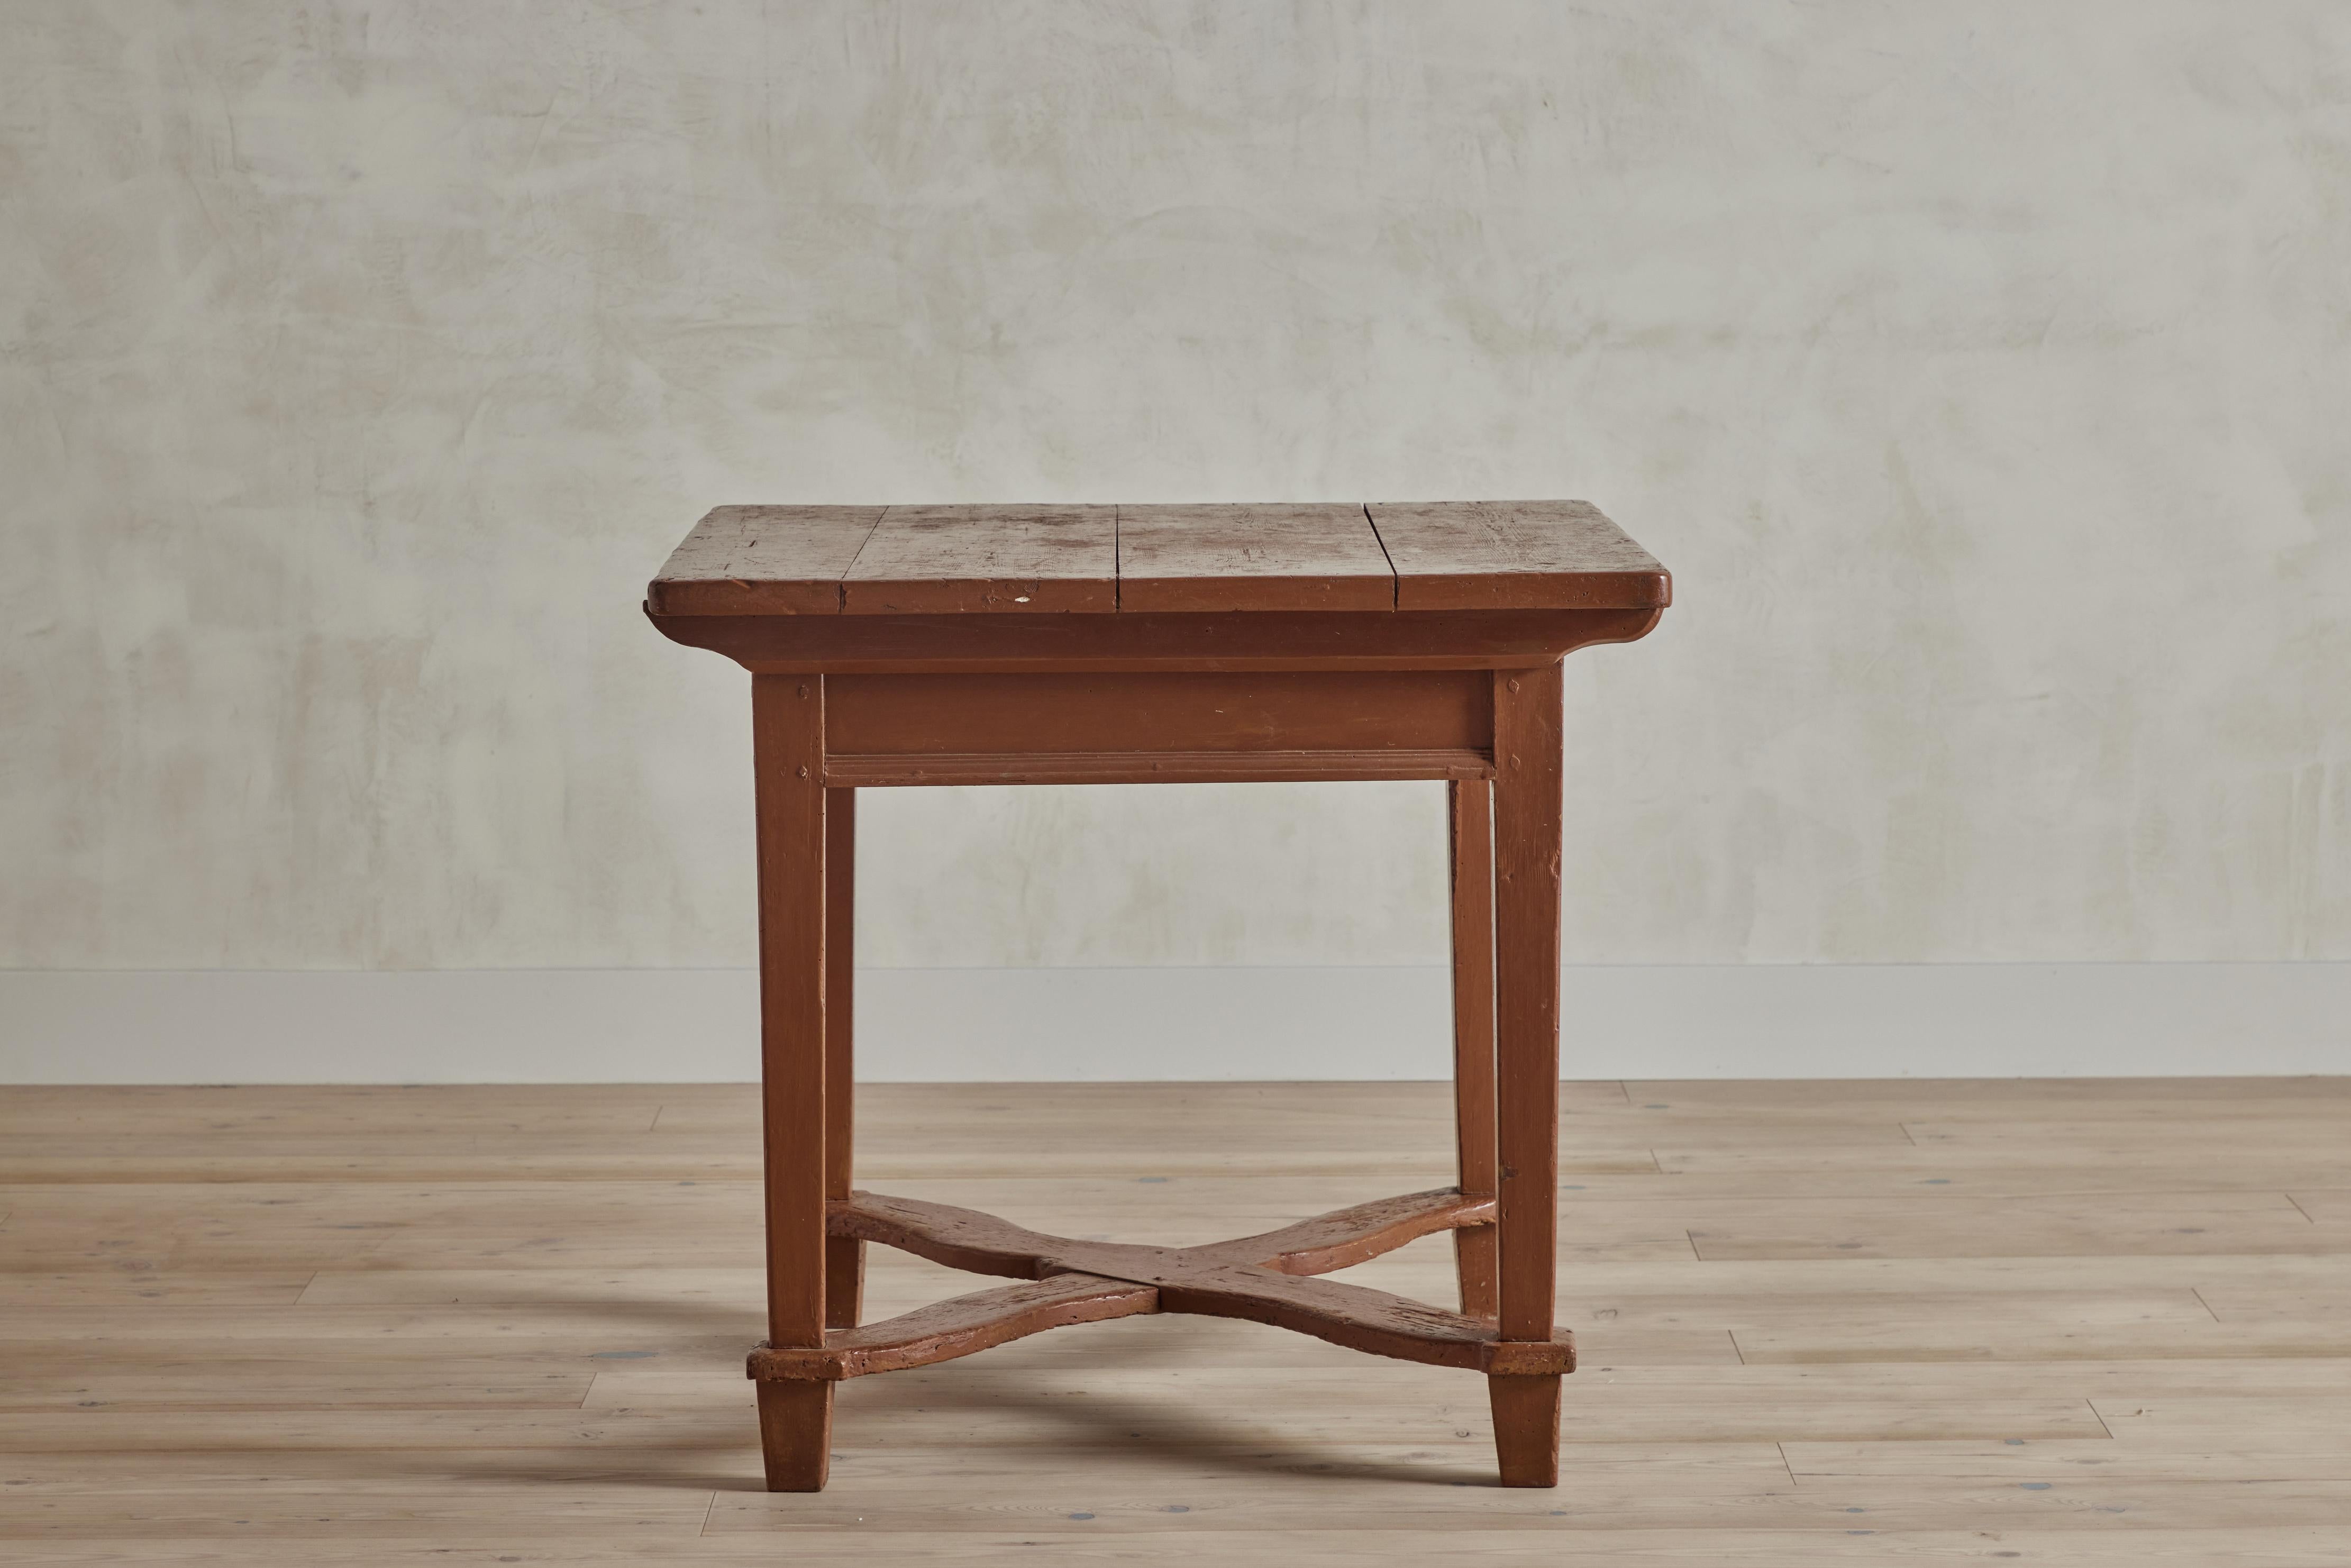 early american side table